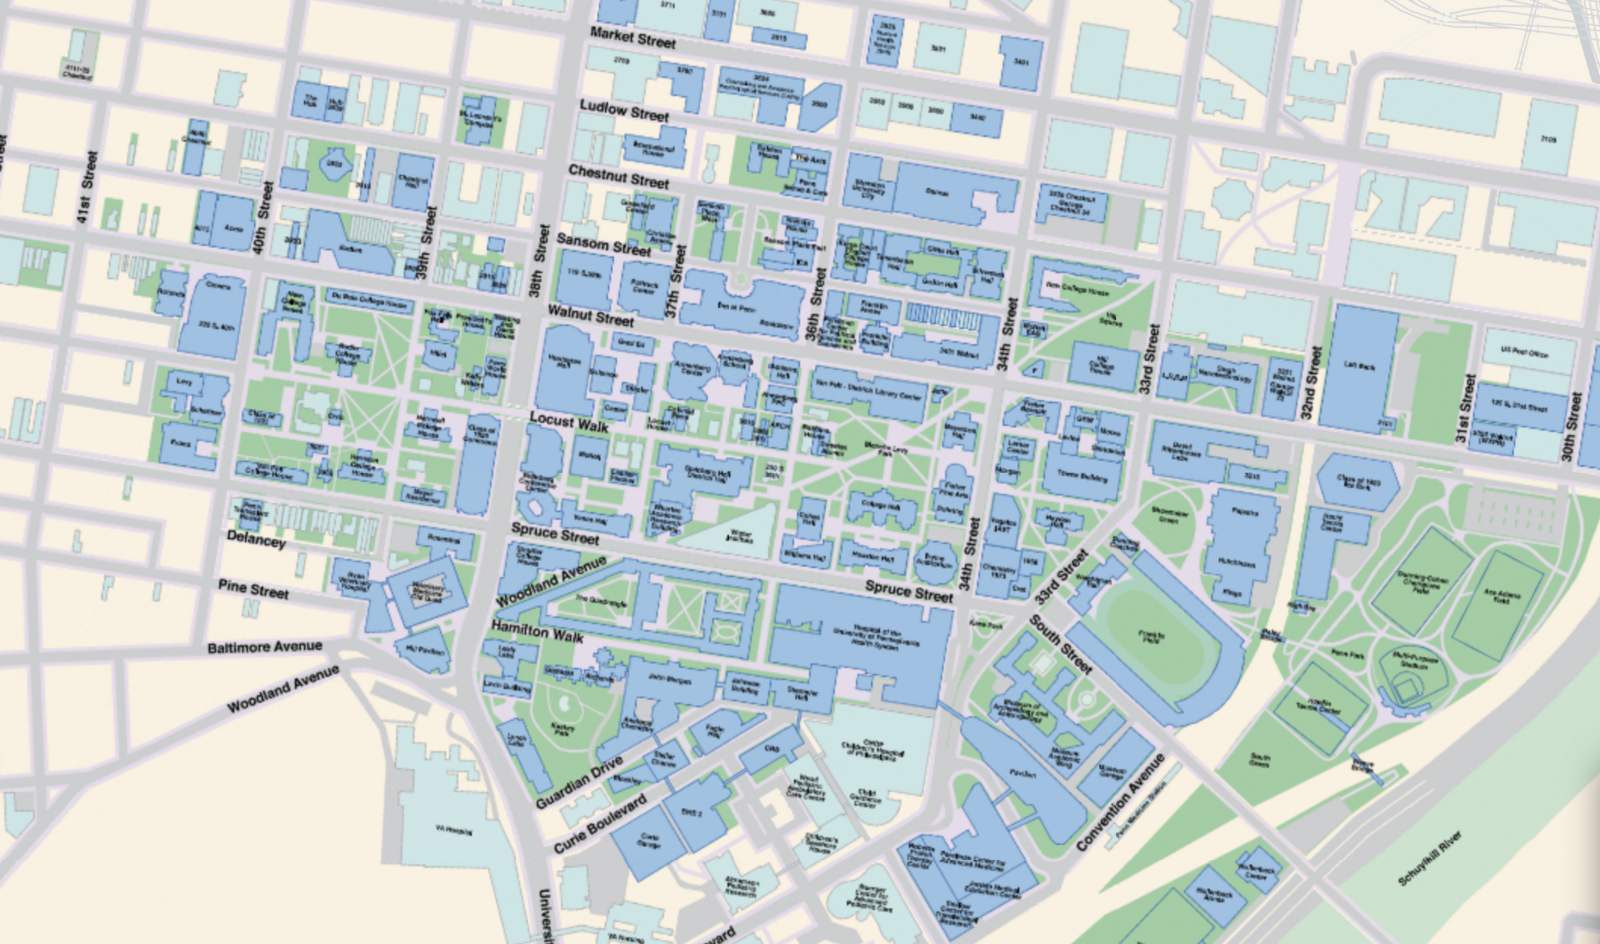 Screencapture of mapping application showing West Philadelphia streets with penn buildings overlaid